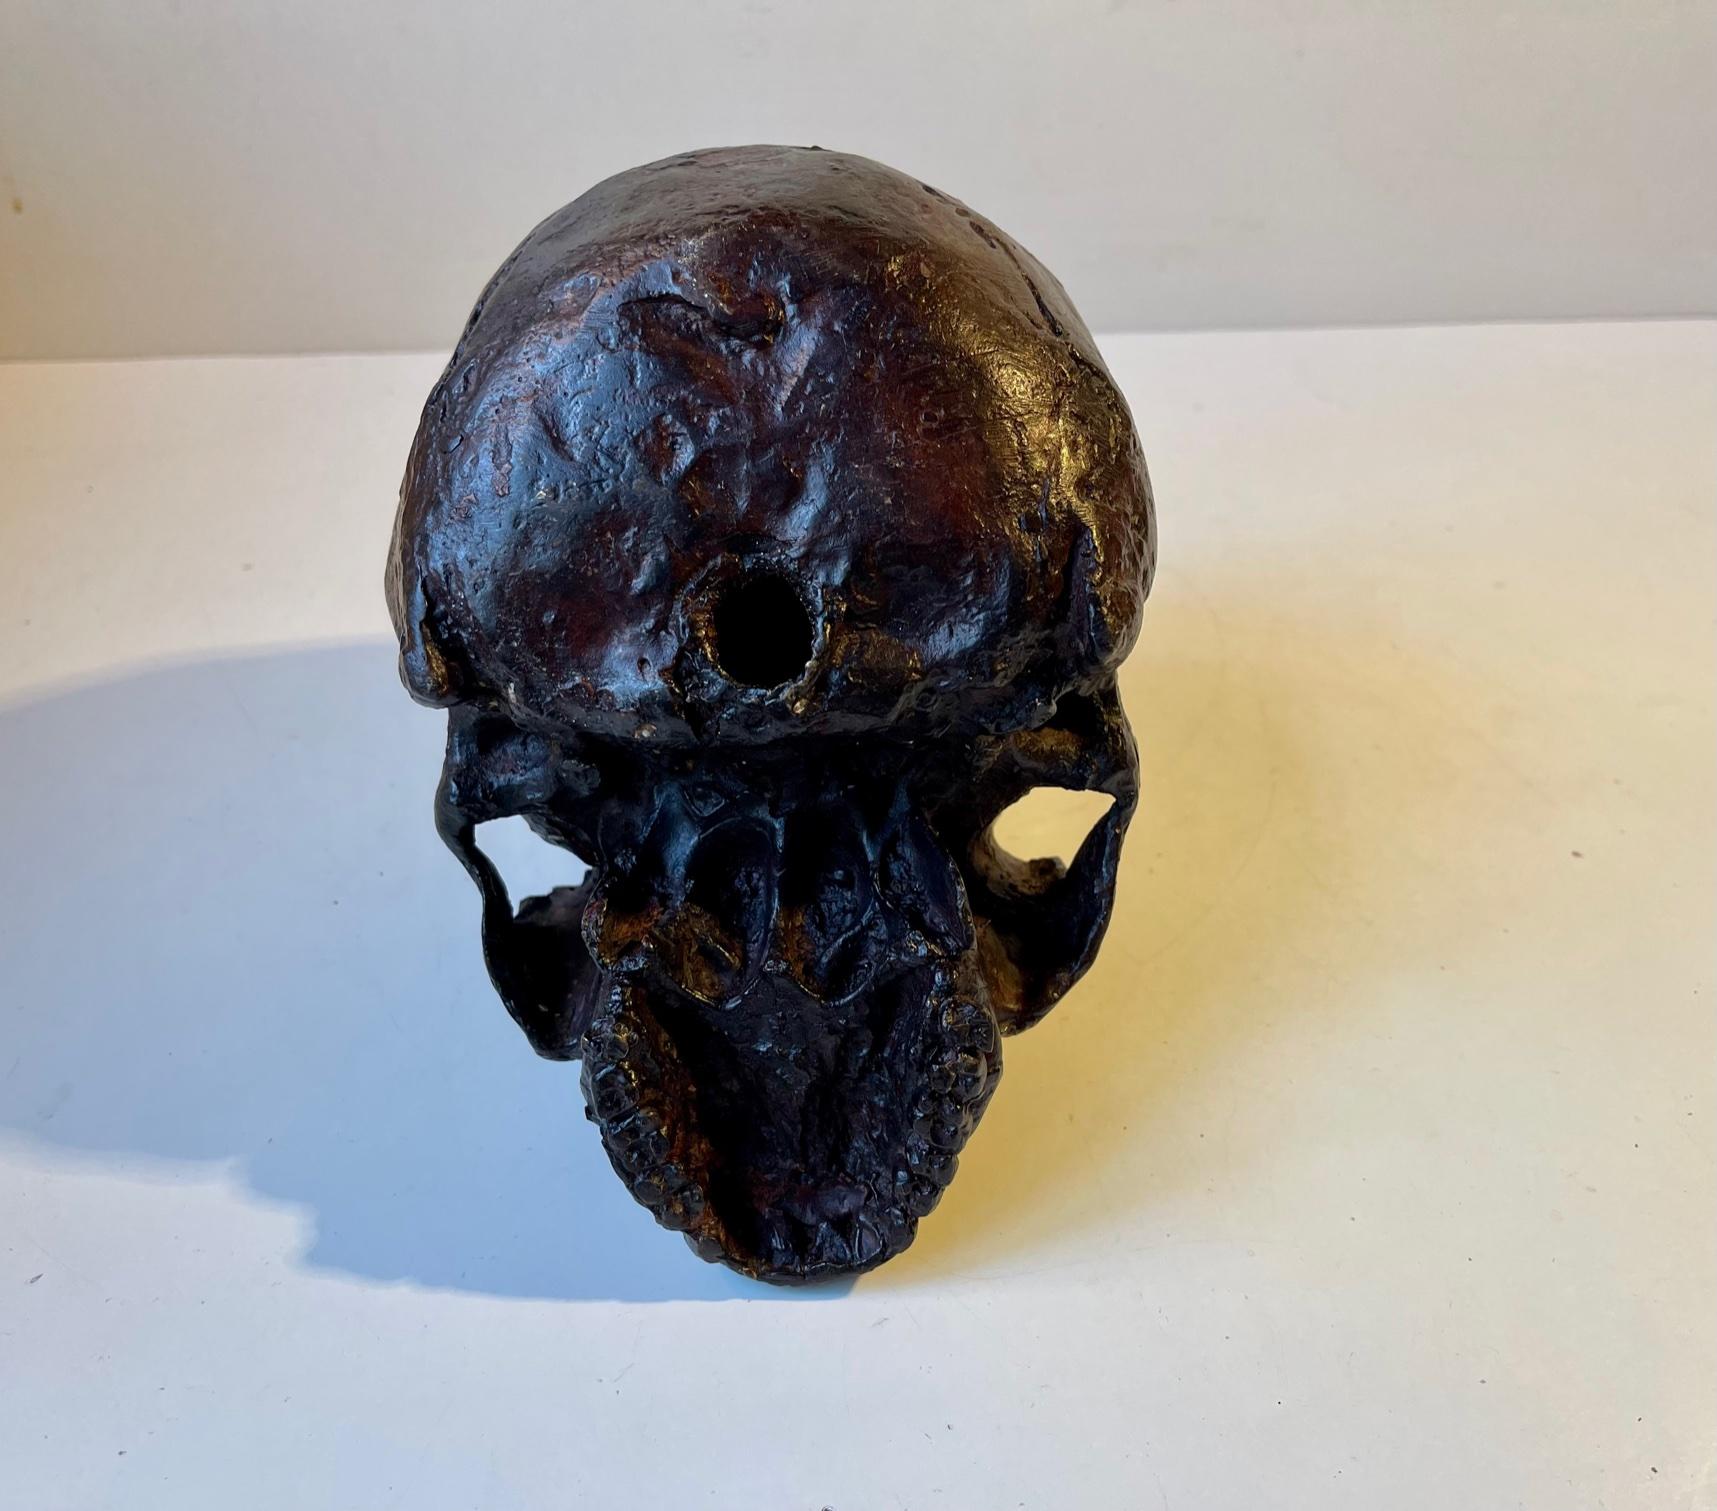 Mid-20th Century Vintage Bronze Cast of a Human Skull 1:1, 1950s